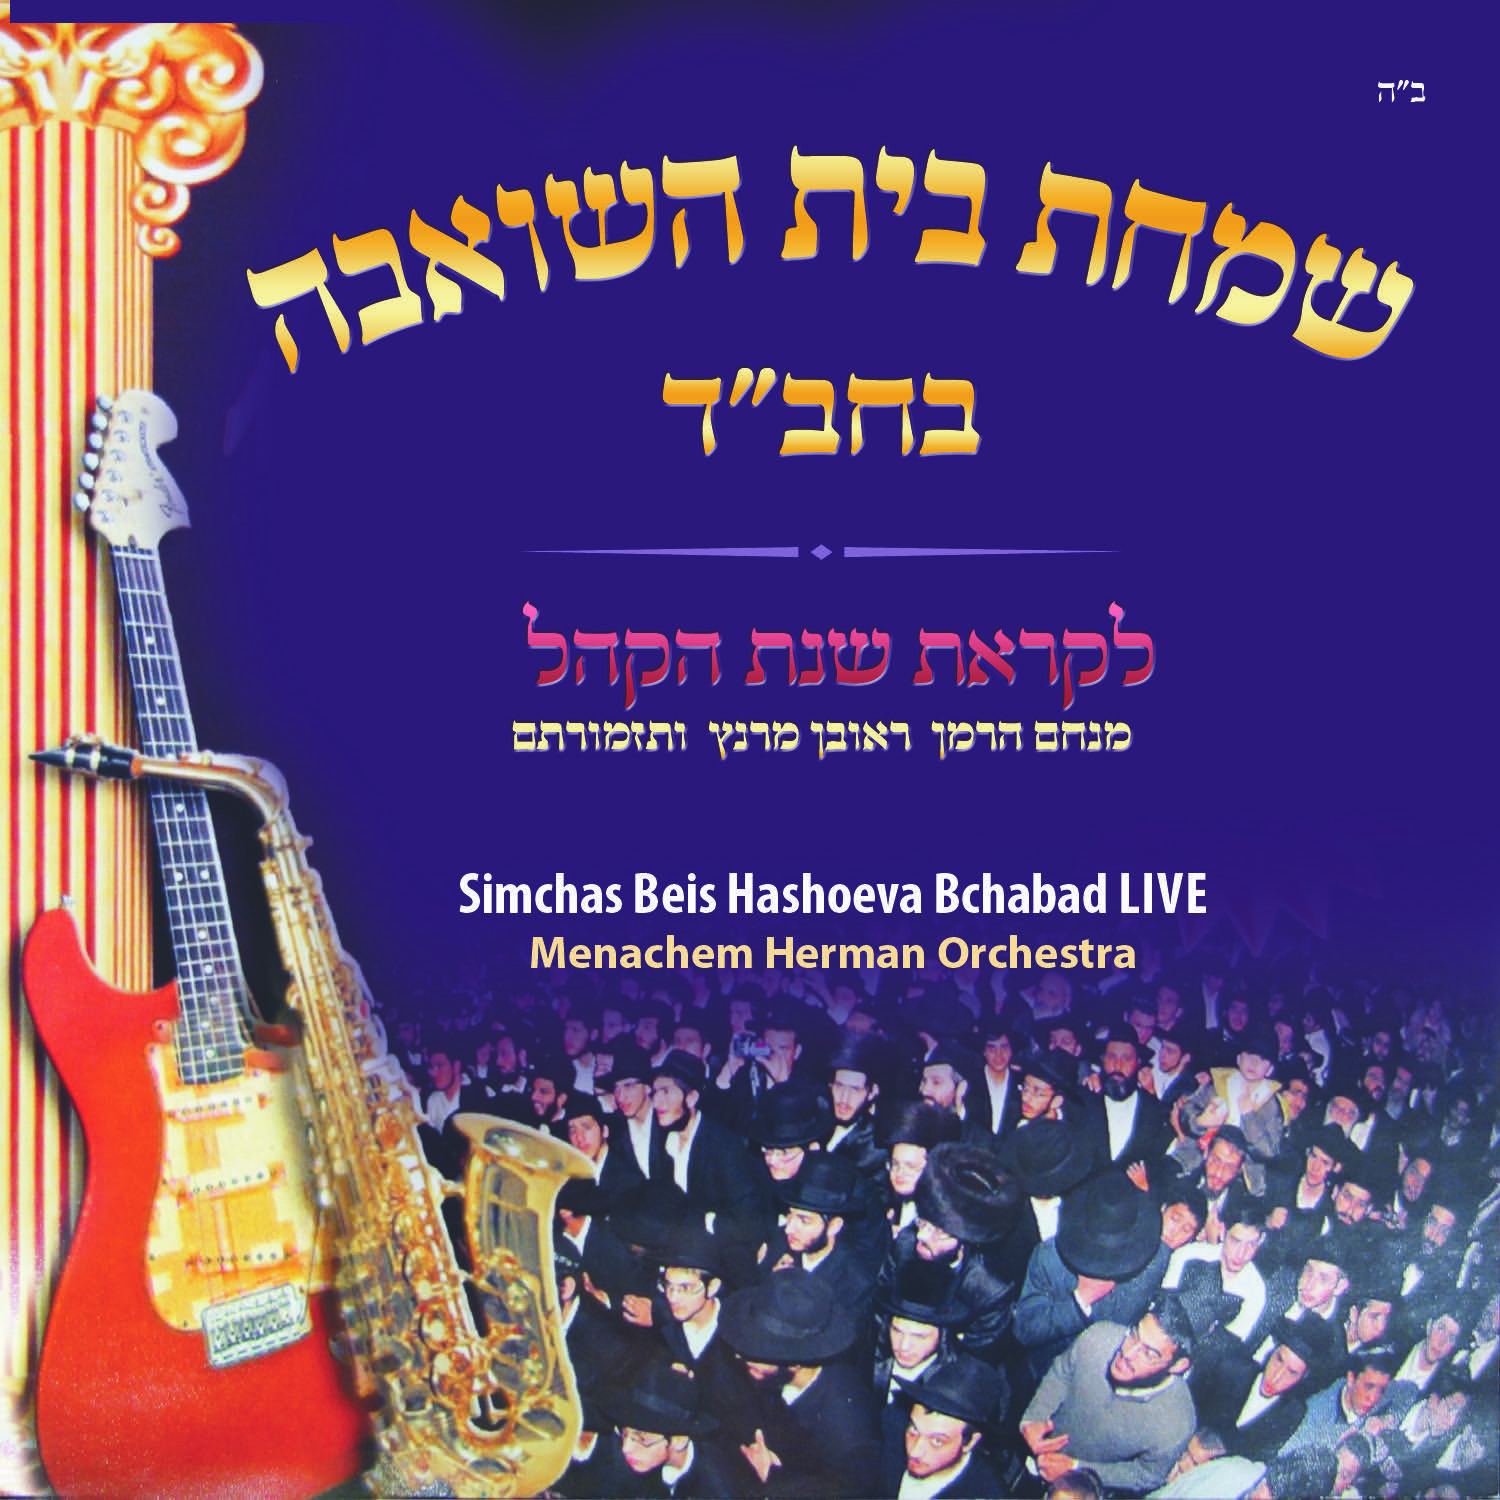 Simchas Beis Hashoeva In Chabad